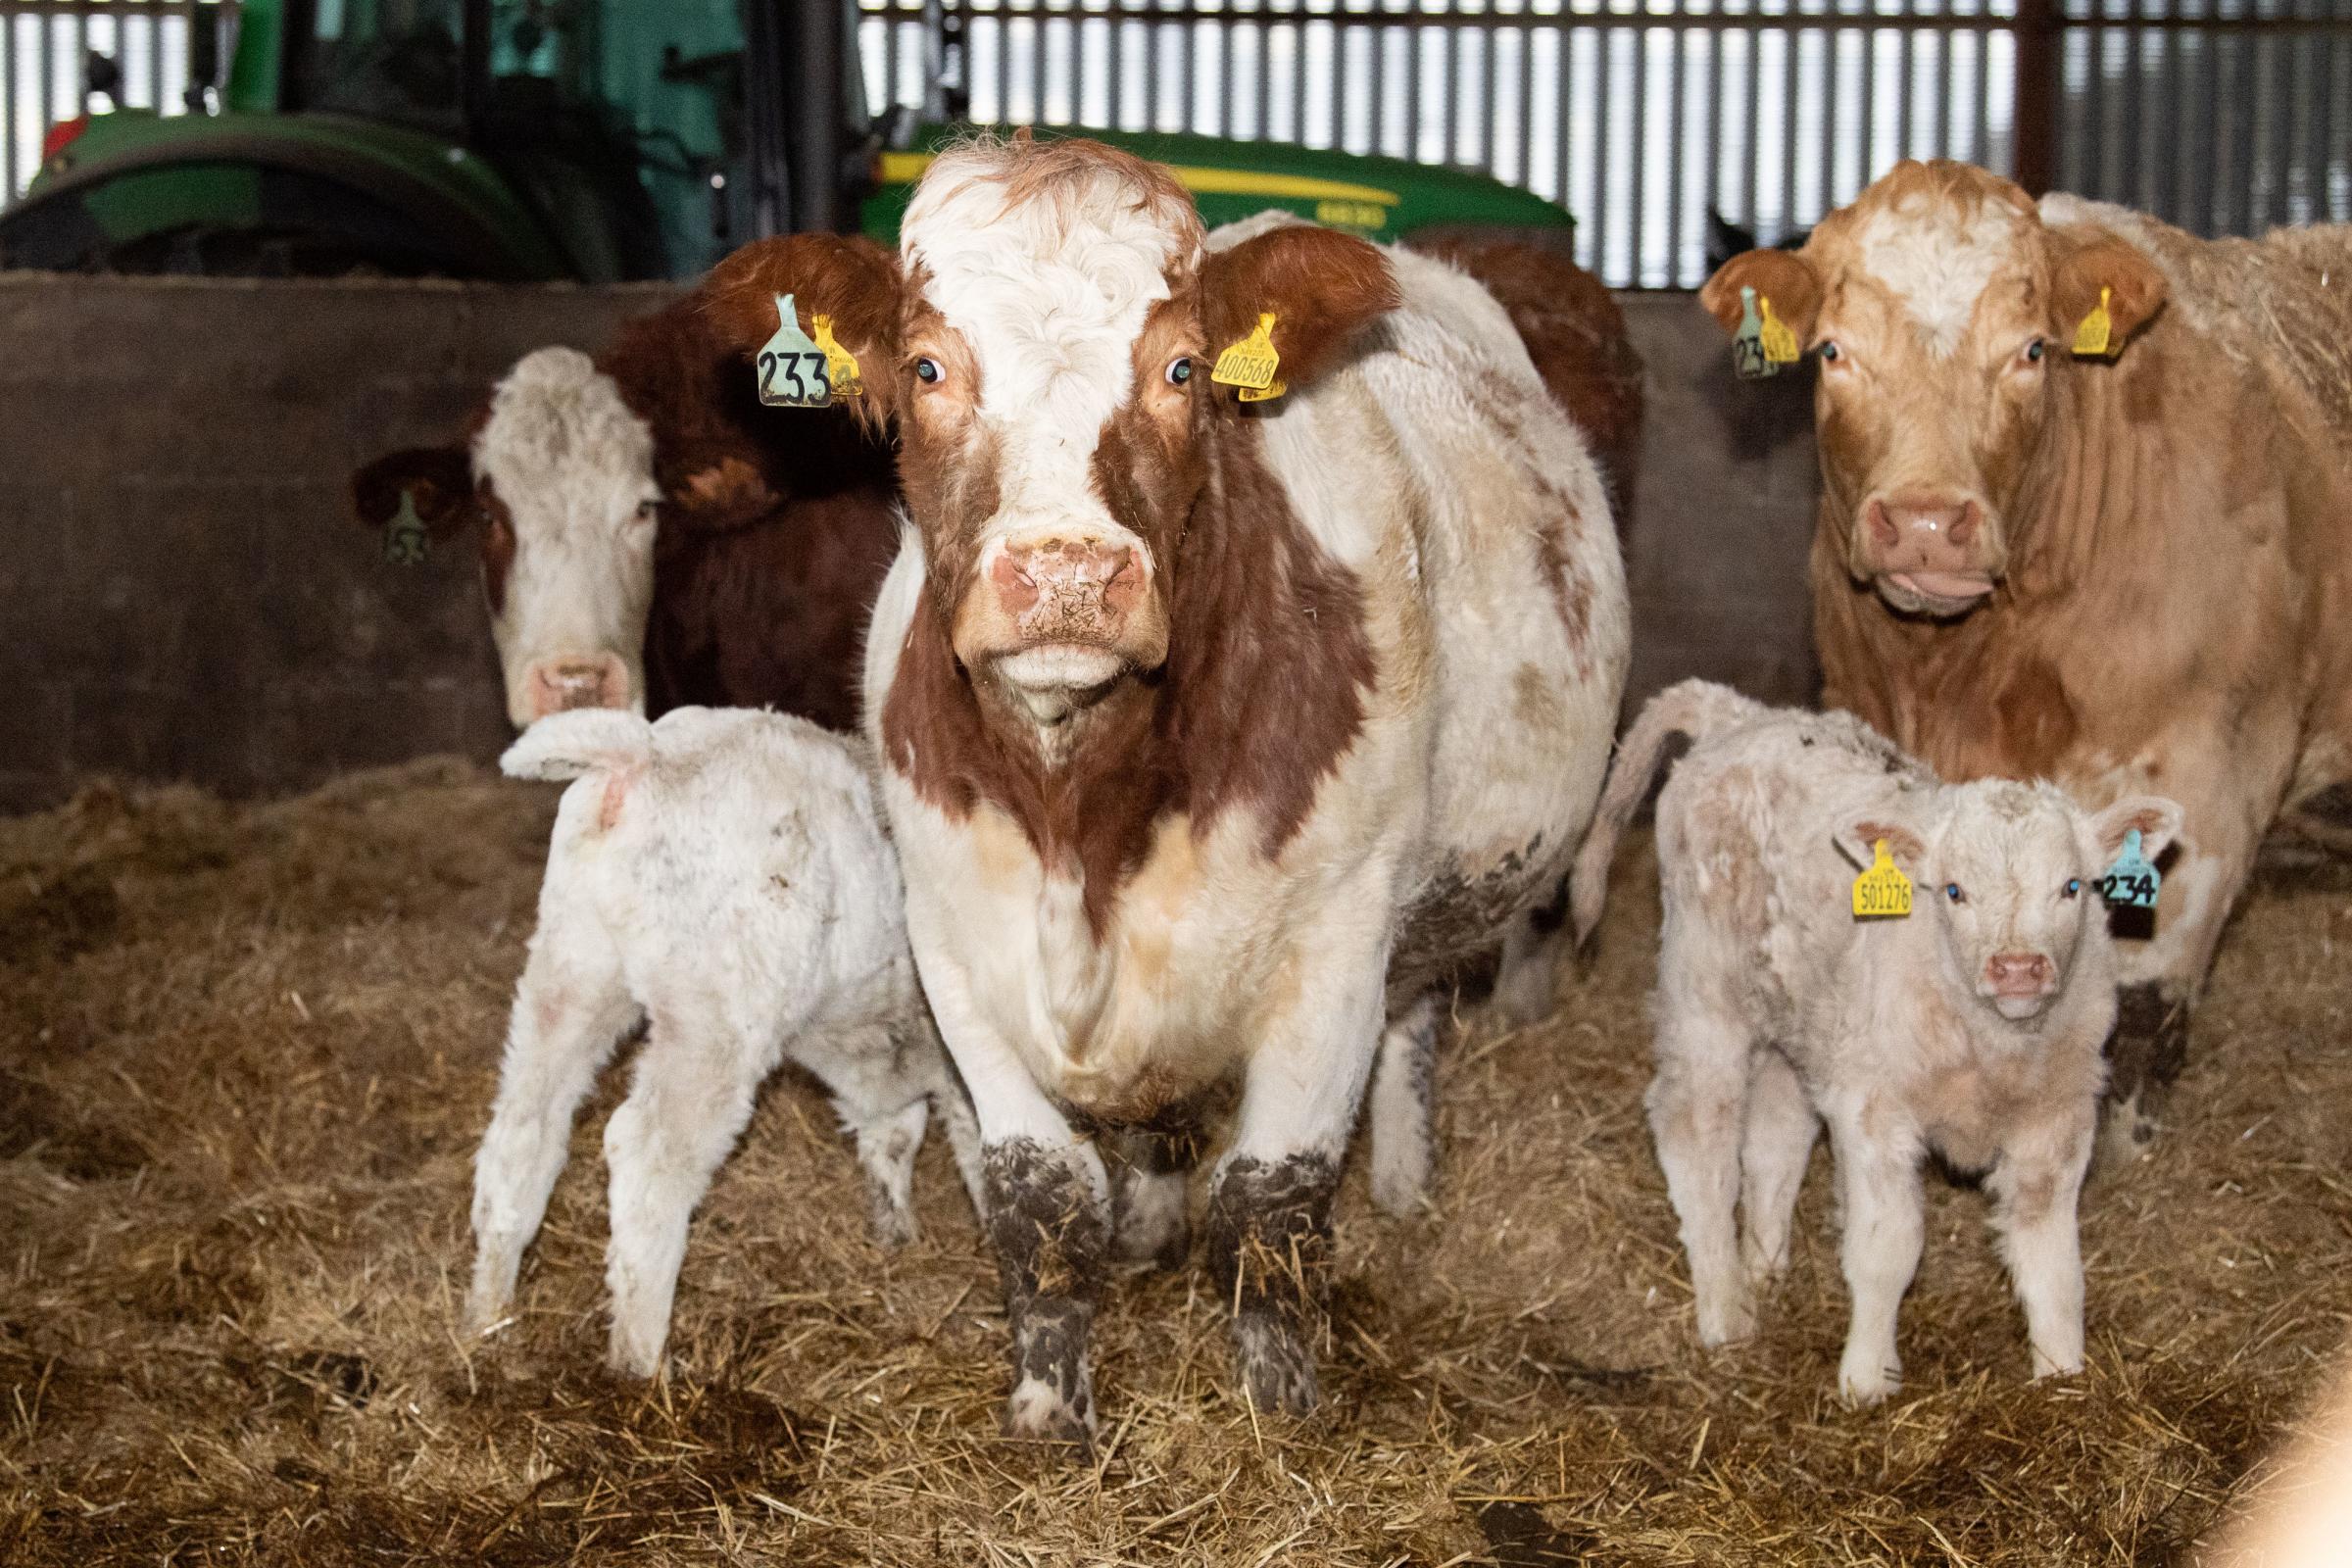 All cattle are in wintered over three farm steadings, with the cows either on cubicles or straw bedding and Calving starts early January Ref:RH210121192 Rob Haining / The Scottish Farmer...